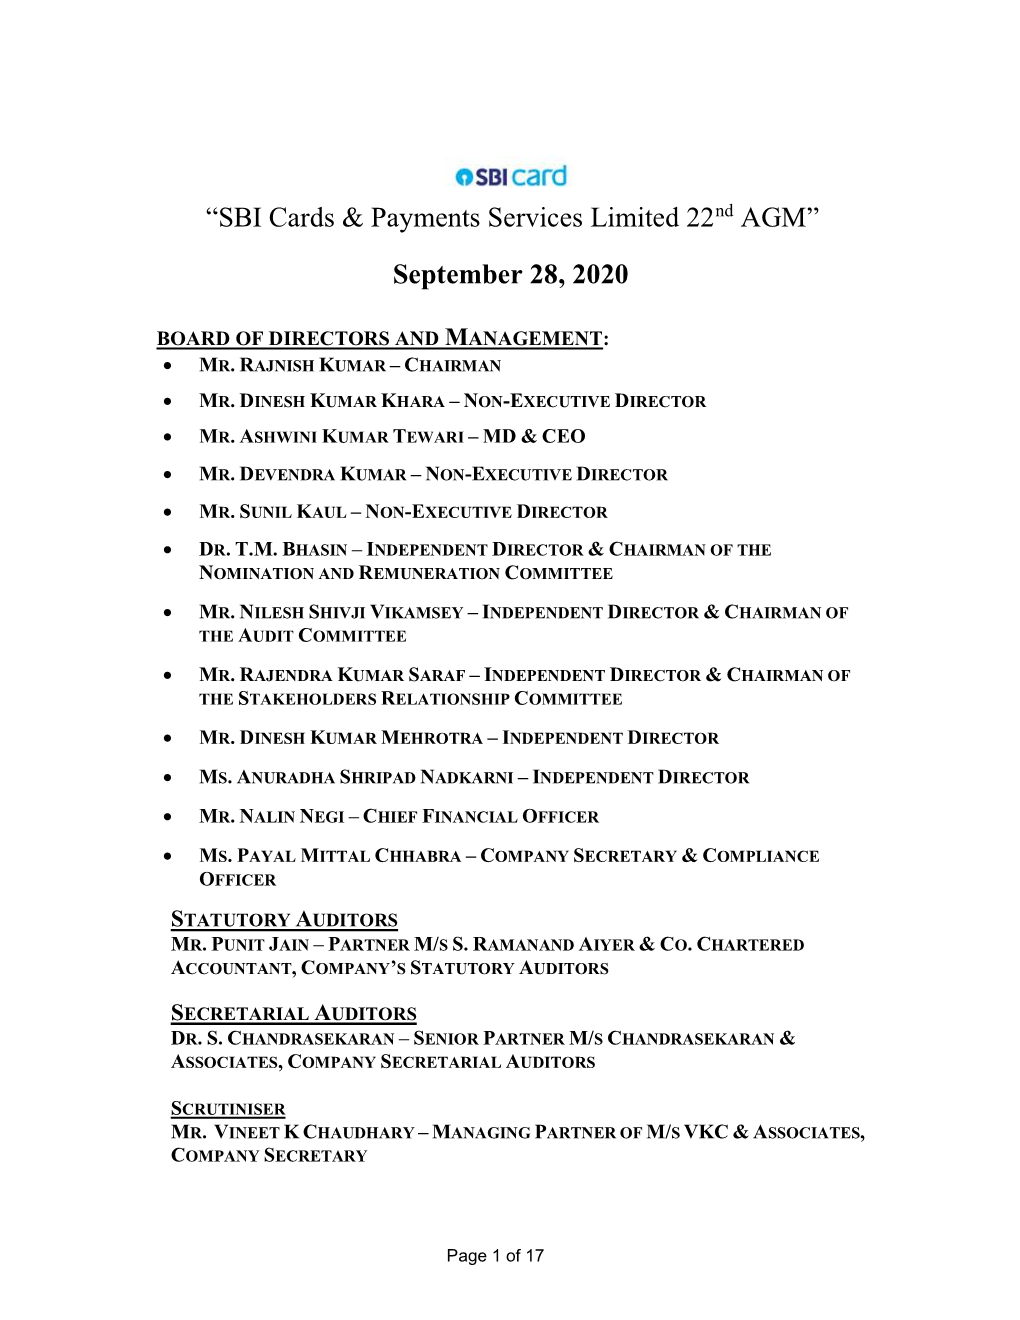 “SBI Cards & Payments Services Limited 22Nd AGM” September 28, 2020